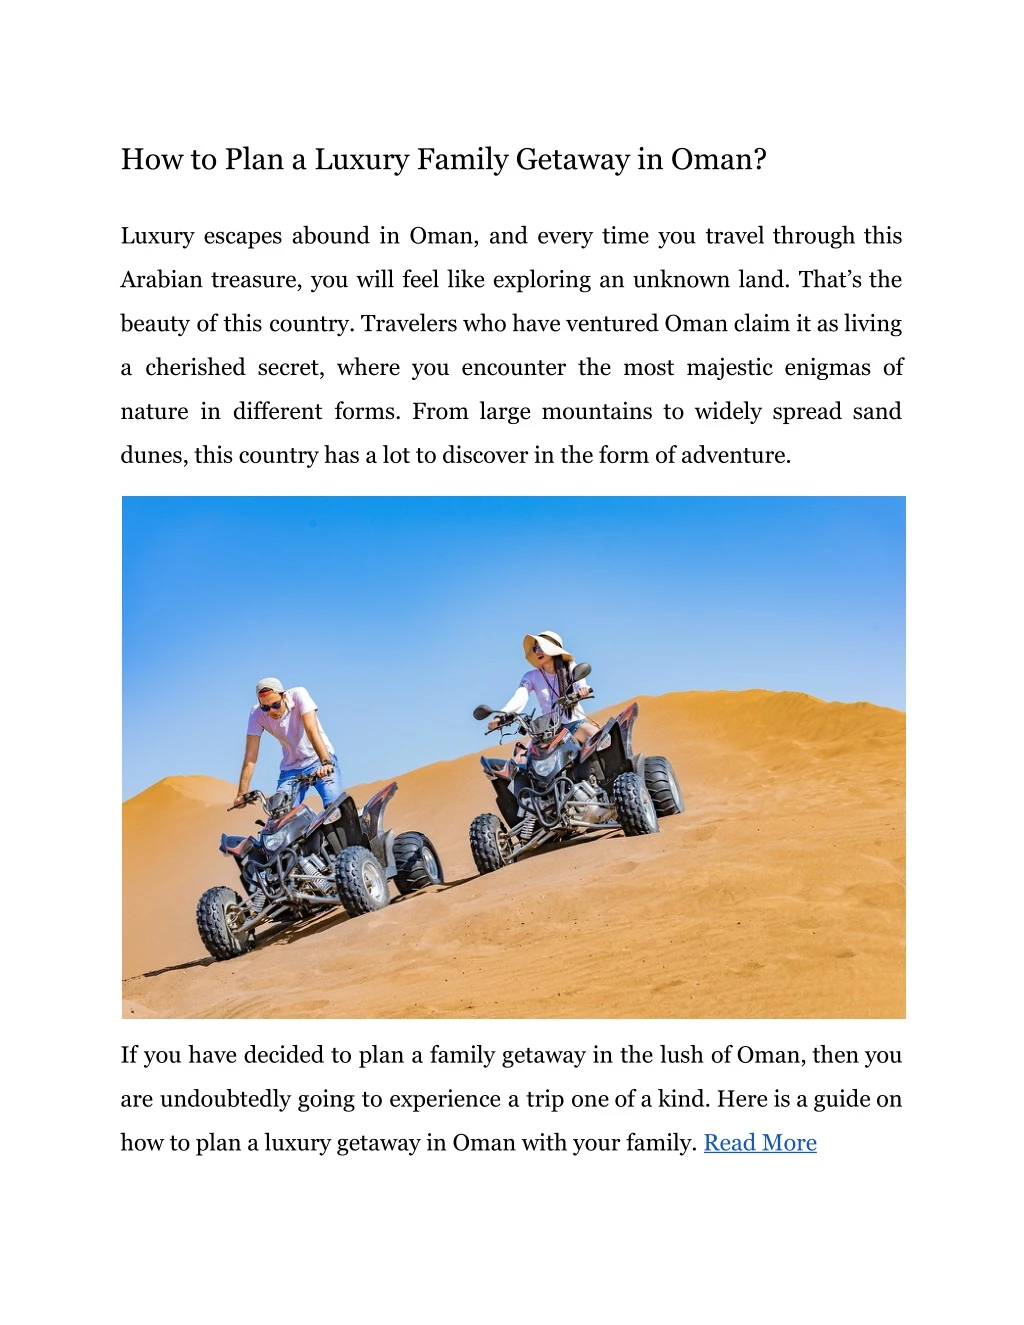 how to plan a luxury family getaway in oman